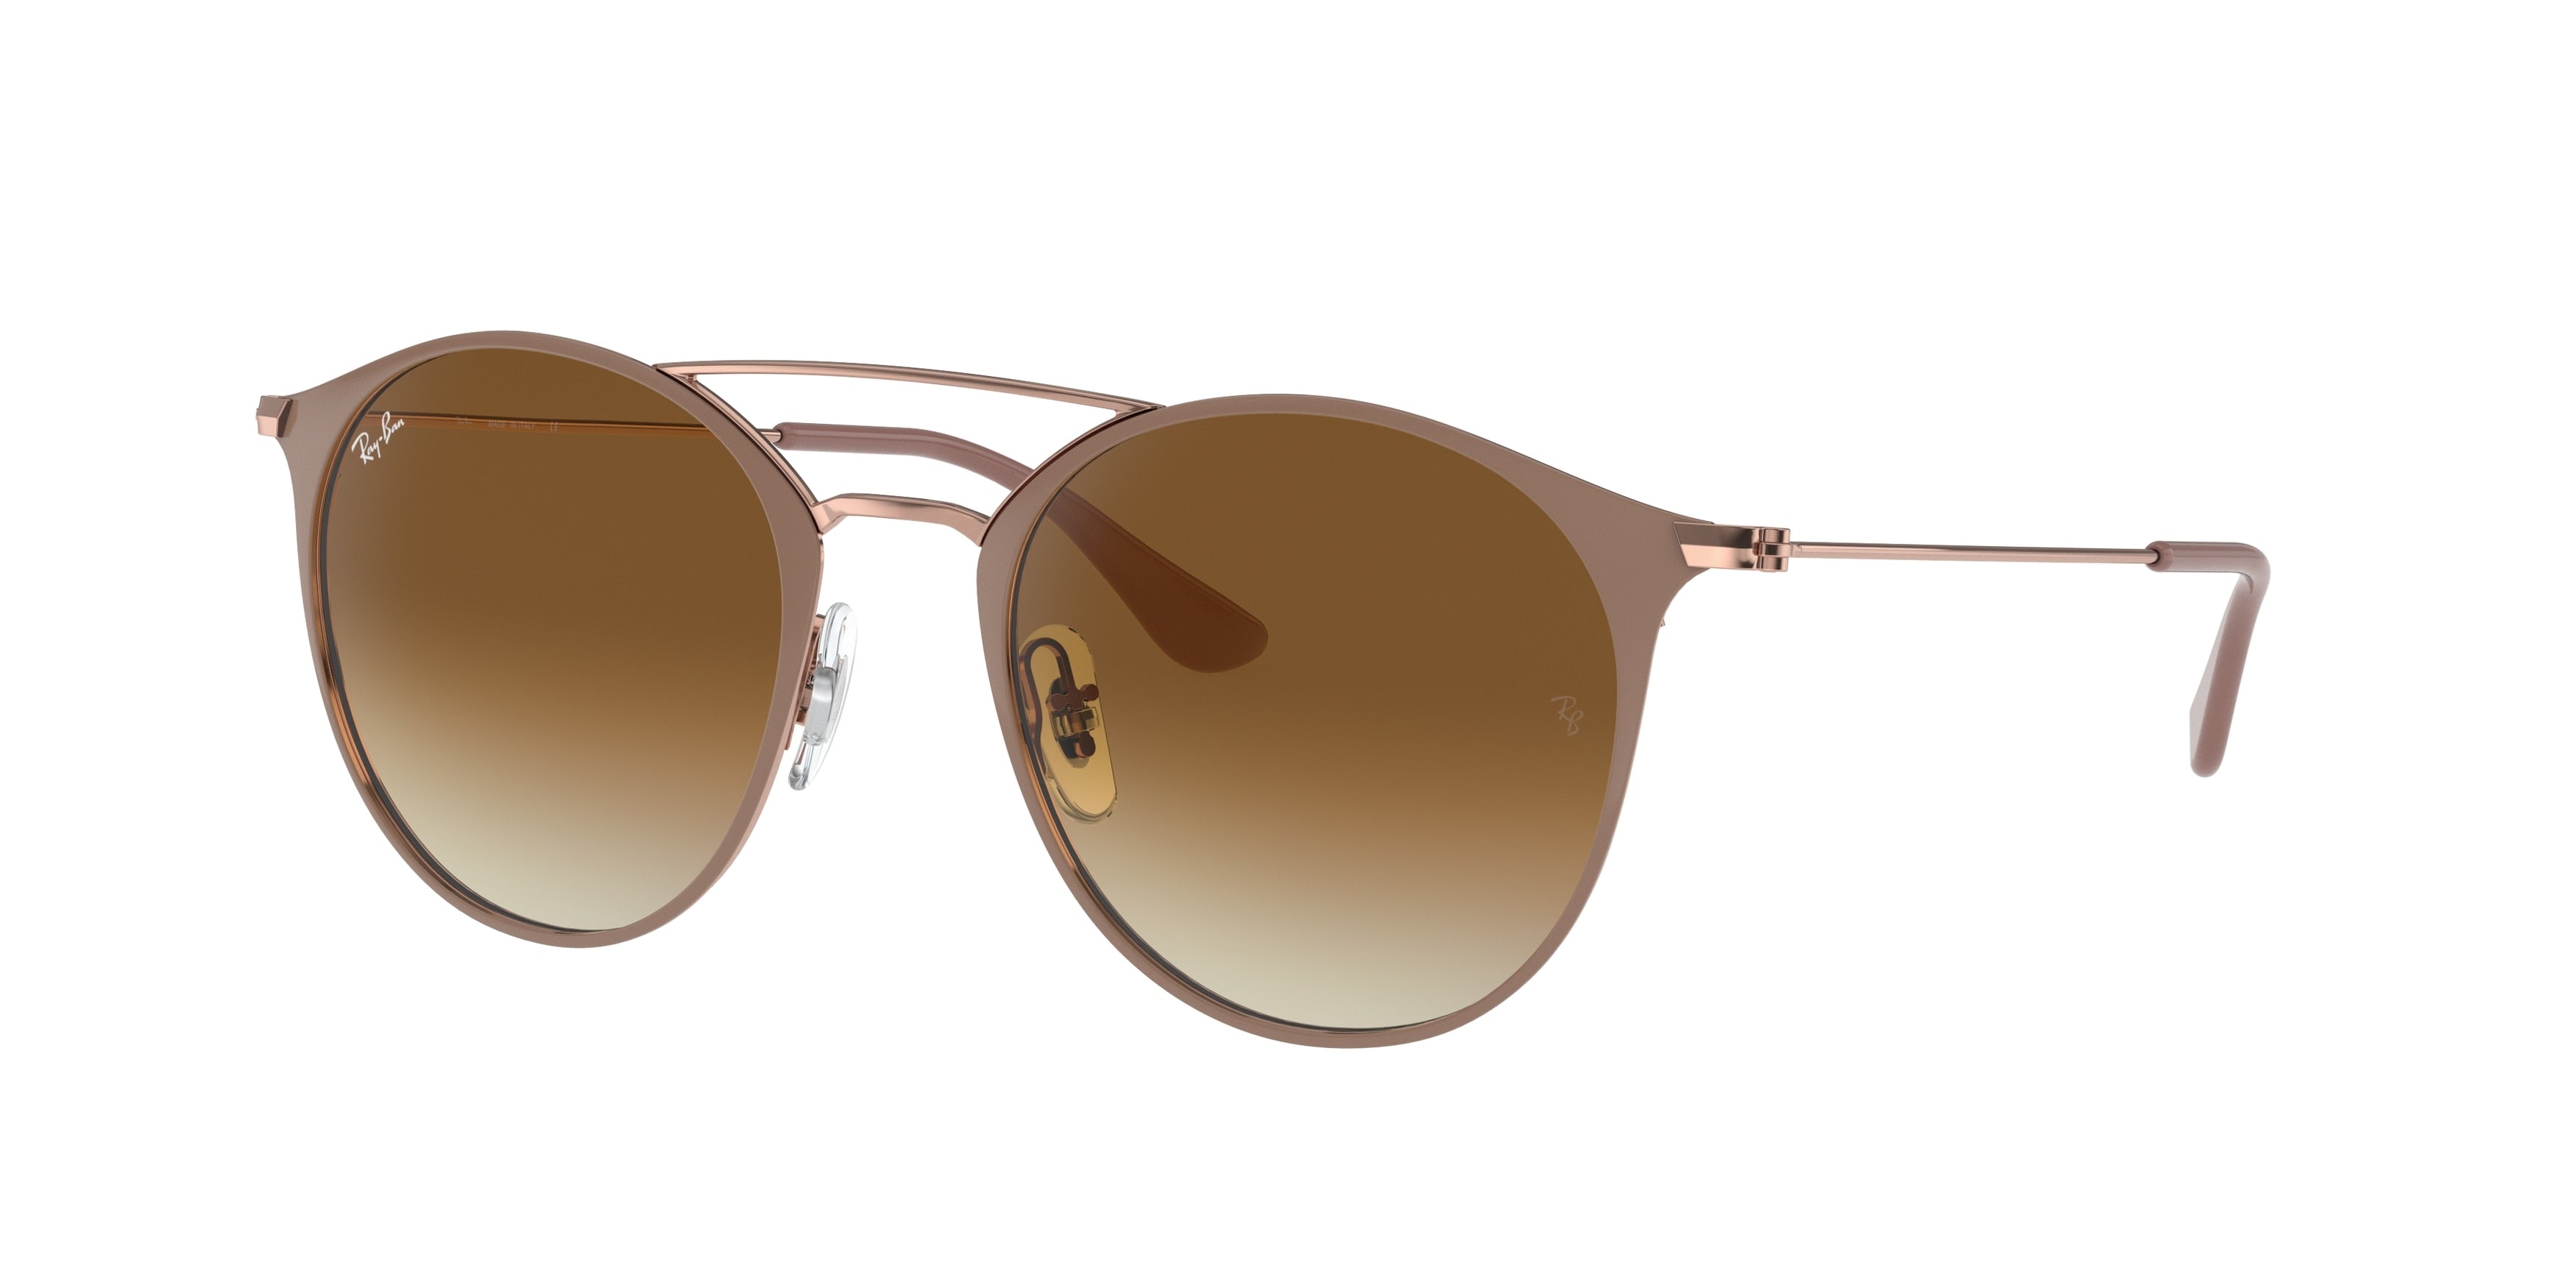 Ray-Ban RB3546 Phantos Sunglasses  907151-Beige On Copper 51-145-20 - Color Map Brown